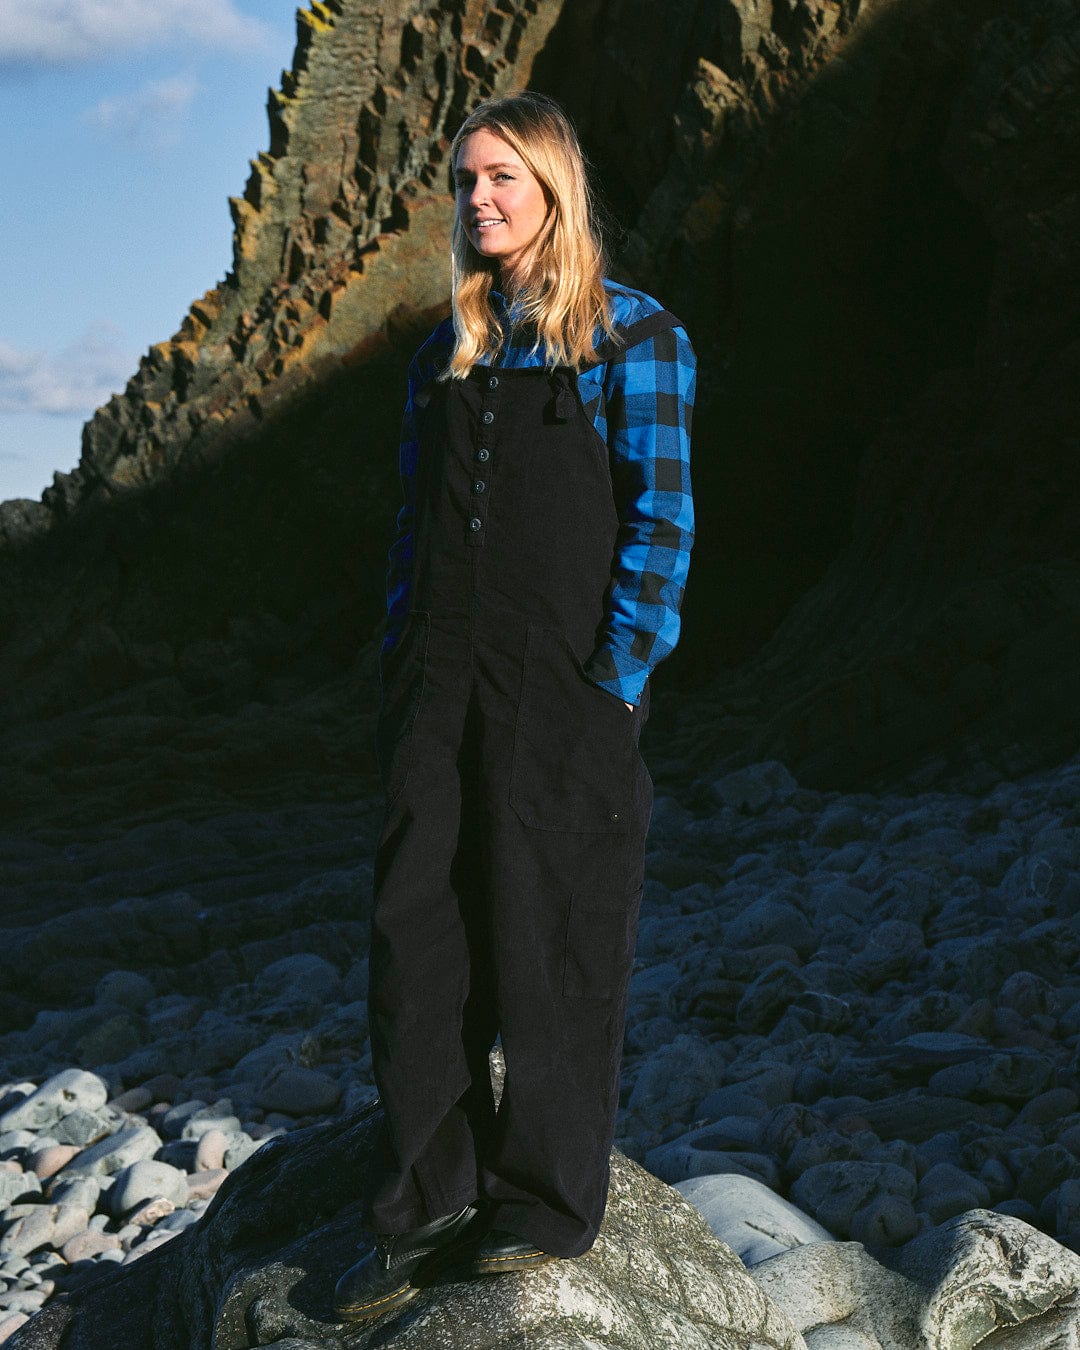 A fashion-conscious woman in Nancy - Womens Cord Dungaree - Dark Blue dungarees standing on rocks by Saltrock.